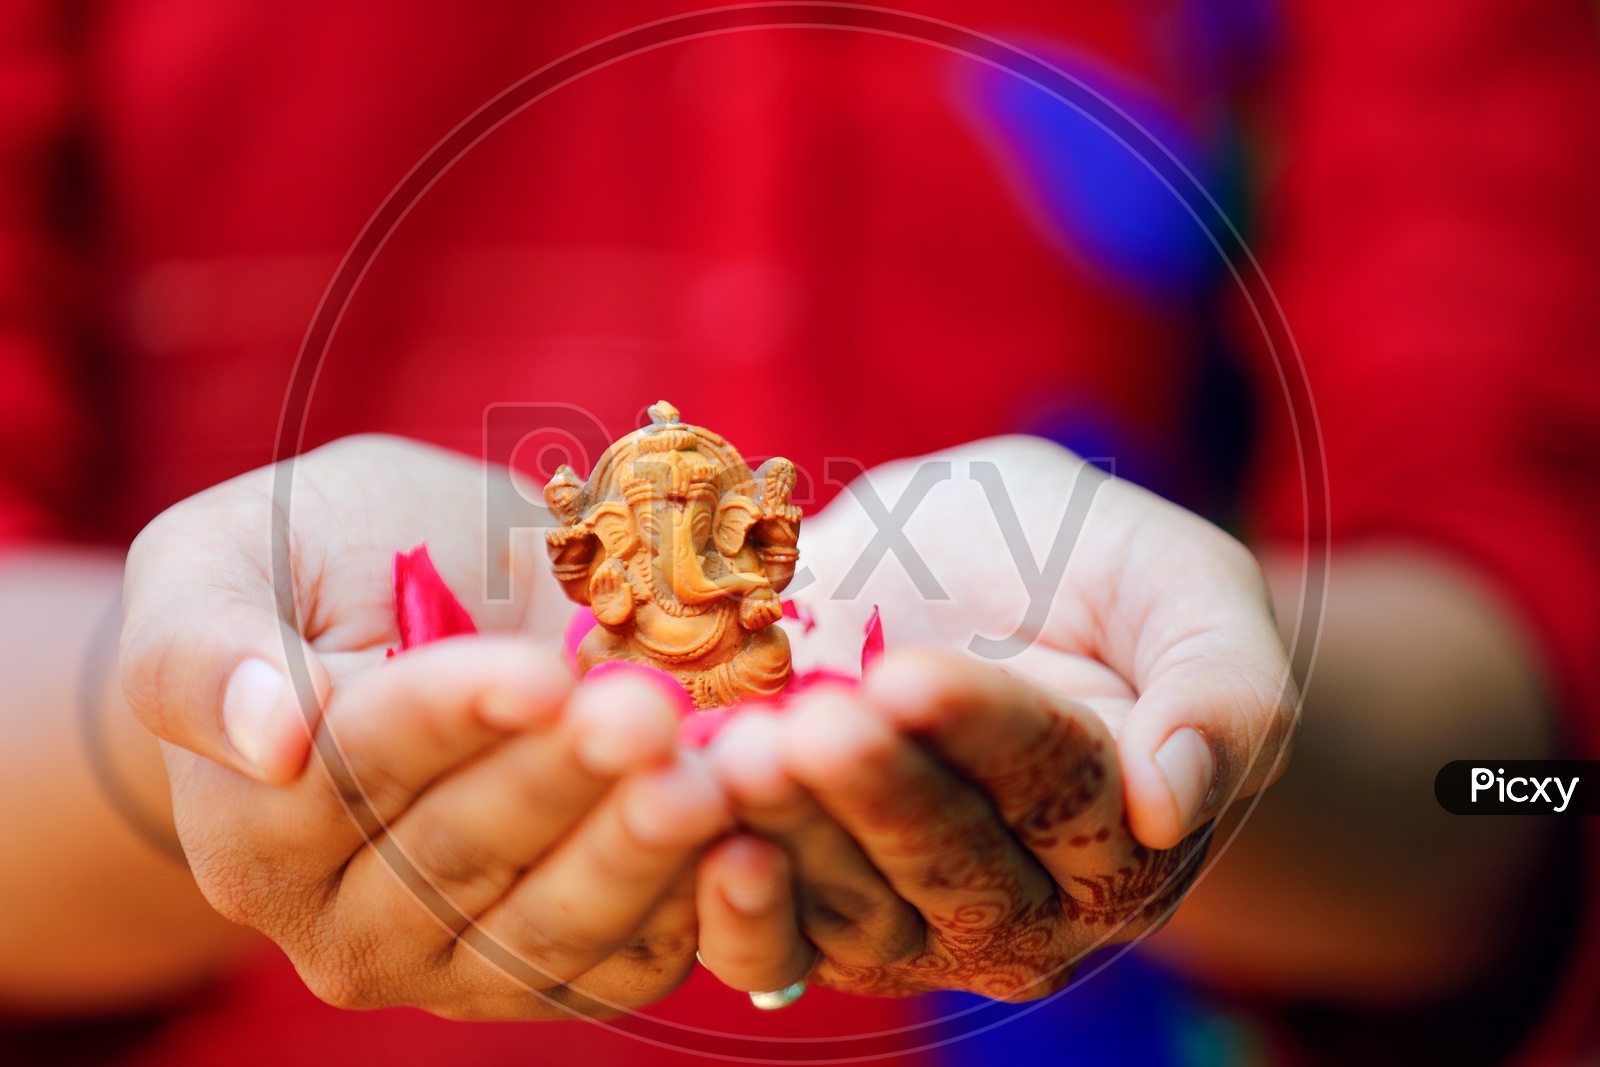 Ganesh Idol placed in hands and beautiful flowers